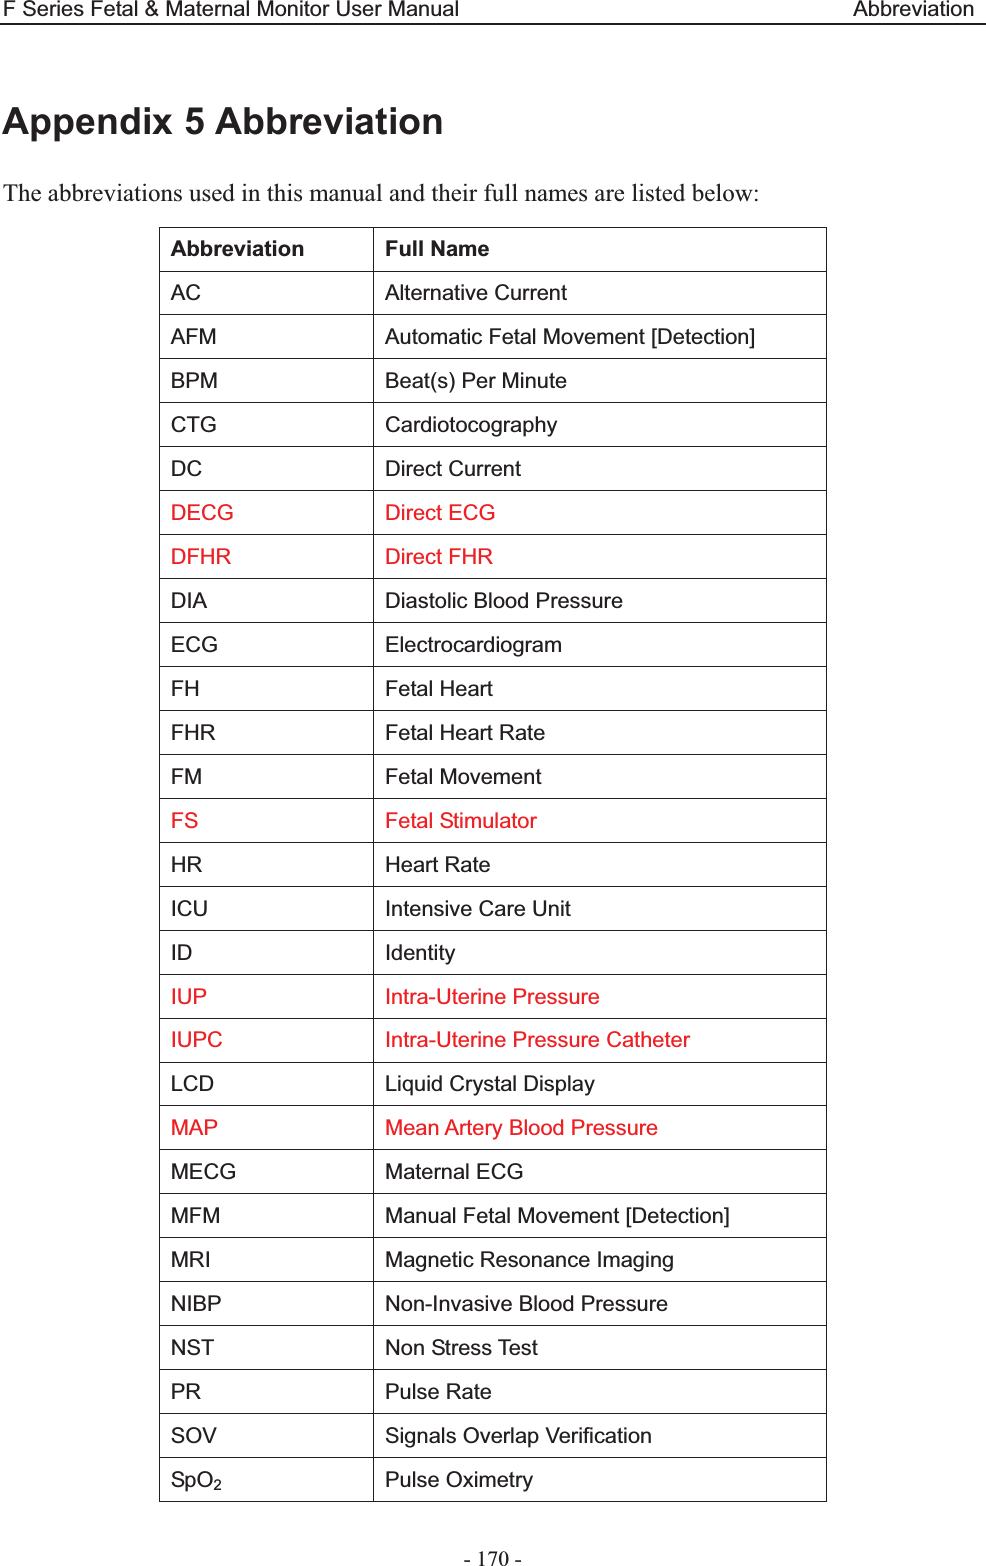 F Series Fetal &amp; Maternal Monitor User Manual                                    Abbreviation - 170 -  Appendix 5 Abbreviation The abbreviations used in this manual and their full names are listed below: Abbreviation Full Name AC Alternative Current AFM  Automatic Fetal Movement [Detection] BPM  Beat(s) Per Minute CTG Cardiotocography DC Direct Current DECG Direct ECG DFHR Direct FHR DIA Diastolic Blood Pressure ECG Electrocardiogram FH Fetal Heart FHR  Fetal Heart Rate FM Fetal Movement FS Fetal Stimulator HR Heart Rate ICU  Intensive Care Unit ID Identity IUP Intra-Uterine Pressure IUPC Intra-Uterine Pressure Catheter LCD  Liquid Crystal Display MAP Mean Artery Blood Pressure MECG Maternal ECG MFM  Manual Fetal Movement [Detection] MRI  Magnetic Resonance Imaging NIBP  Non-Invasive Blood Pressure NST Non Stress Test PR Pulse Rate SOV  Signals Overlap Verification SpO2 Pulse Oximetry 